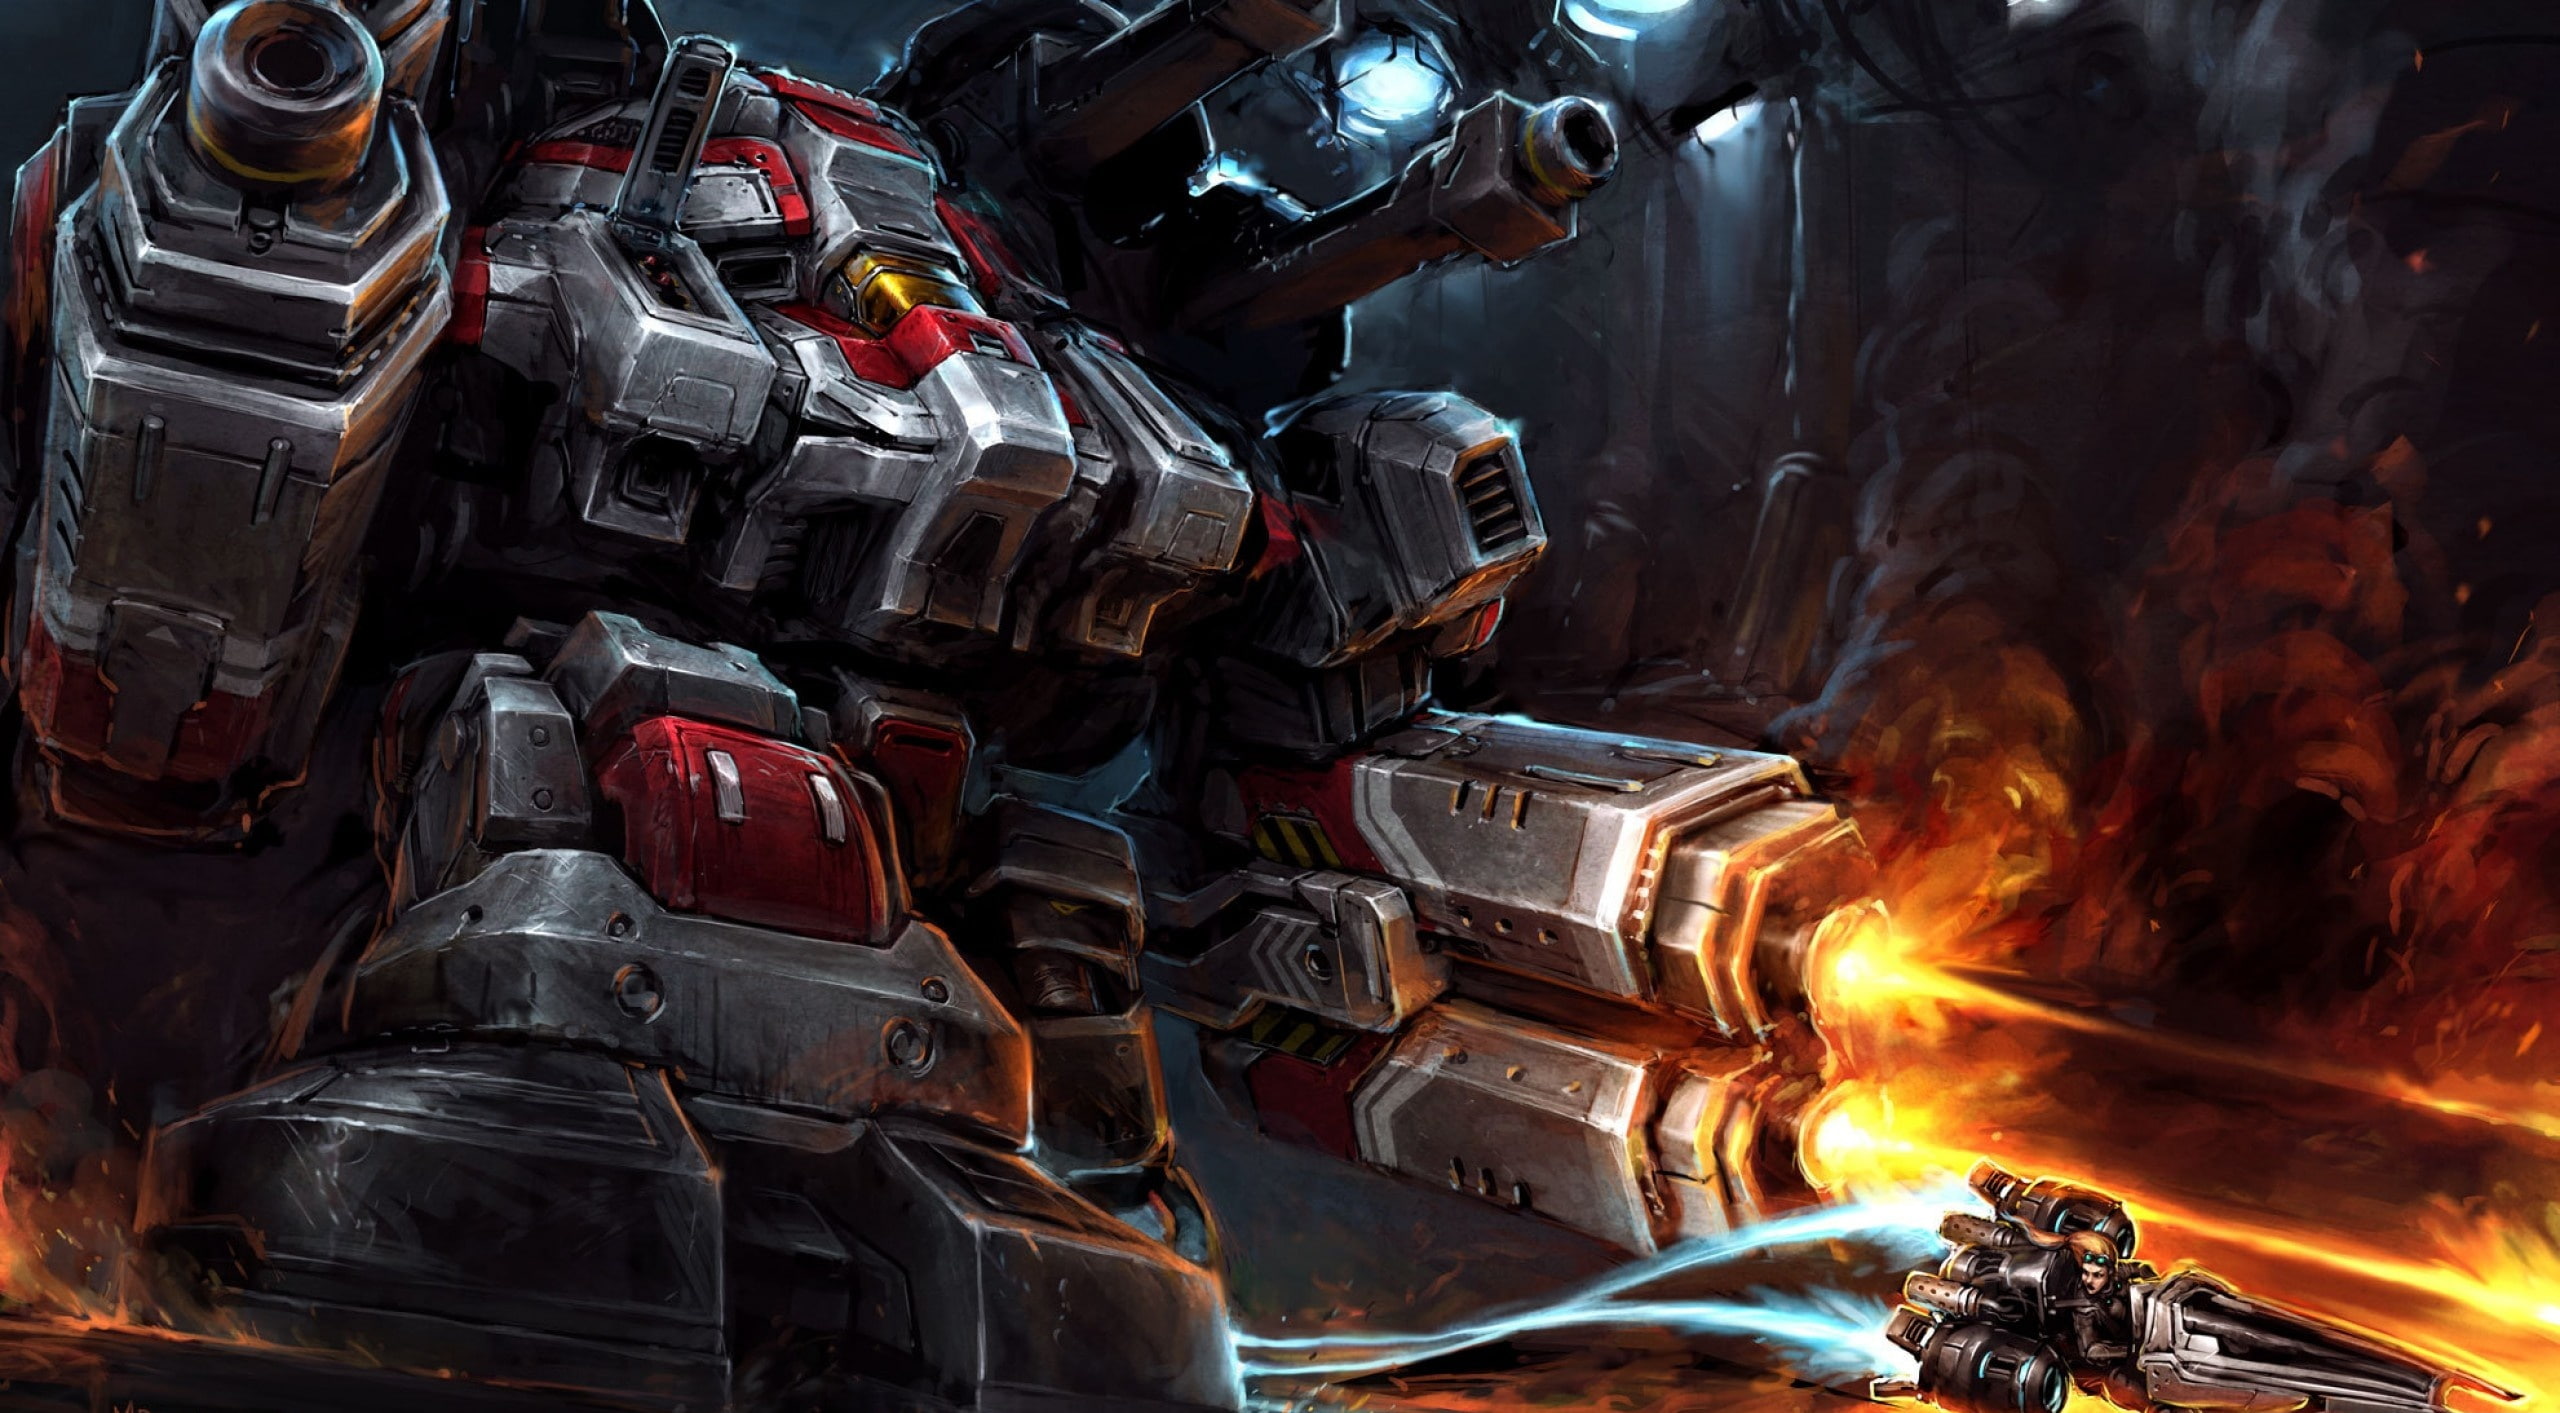 Starcraft Odin, red and gray robot digital wallpaper, Games, no people